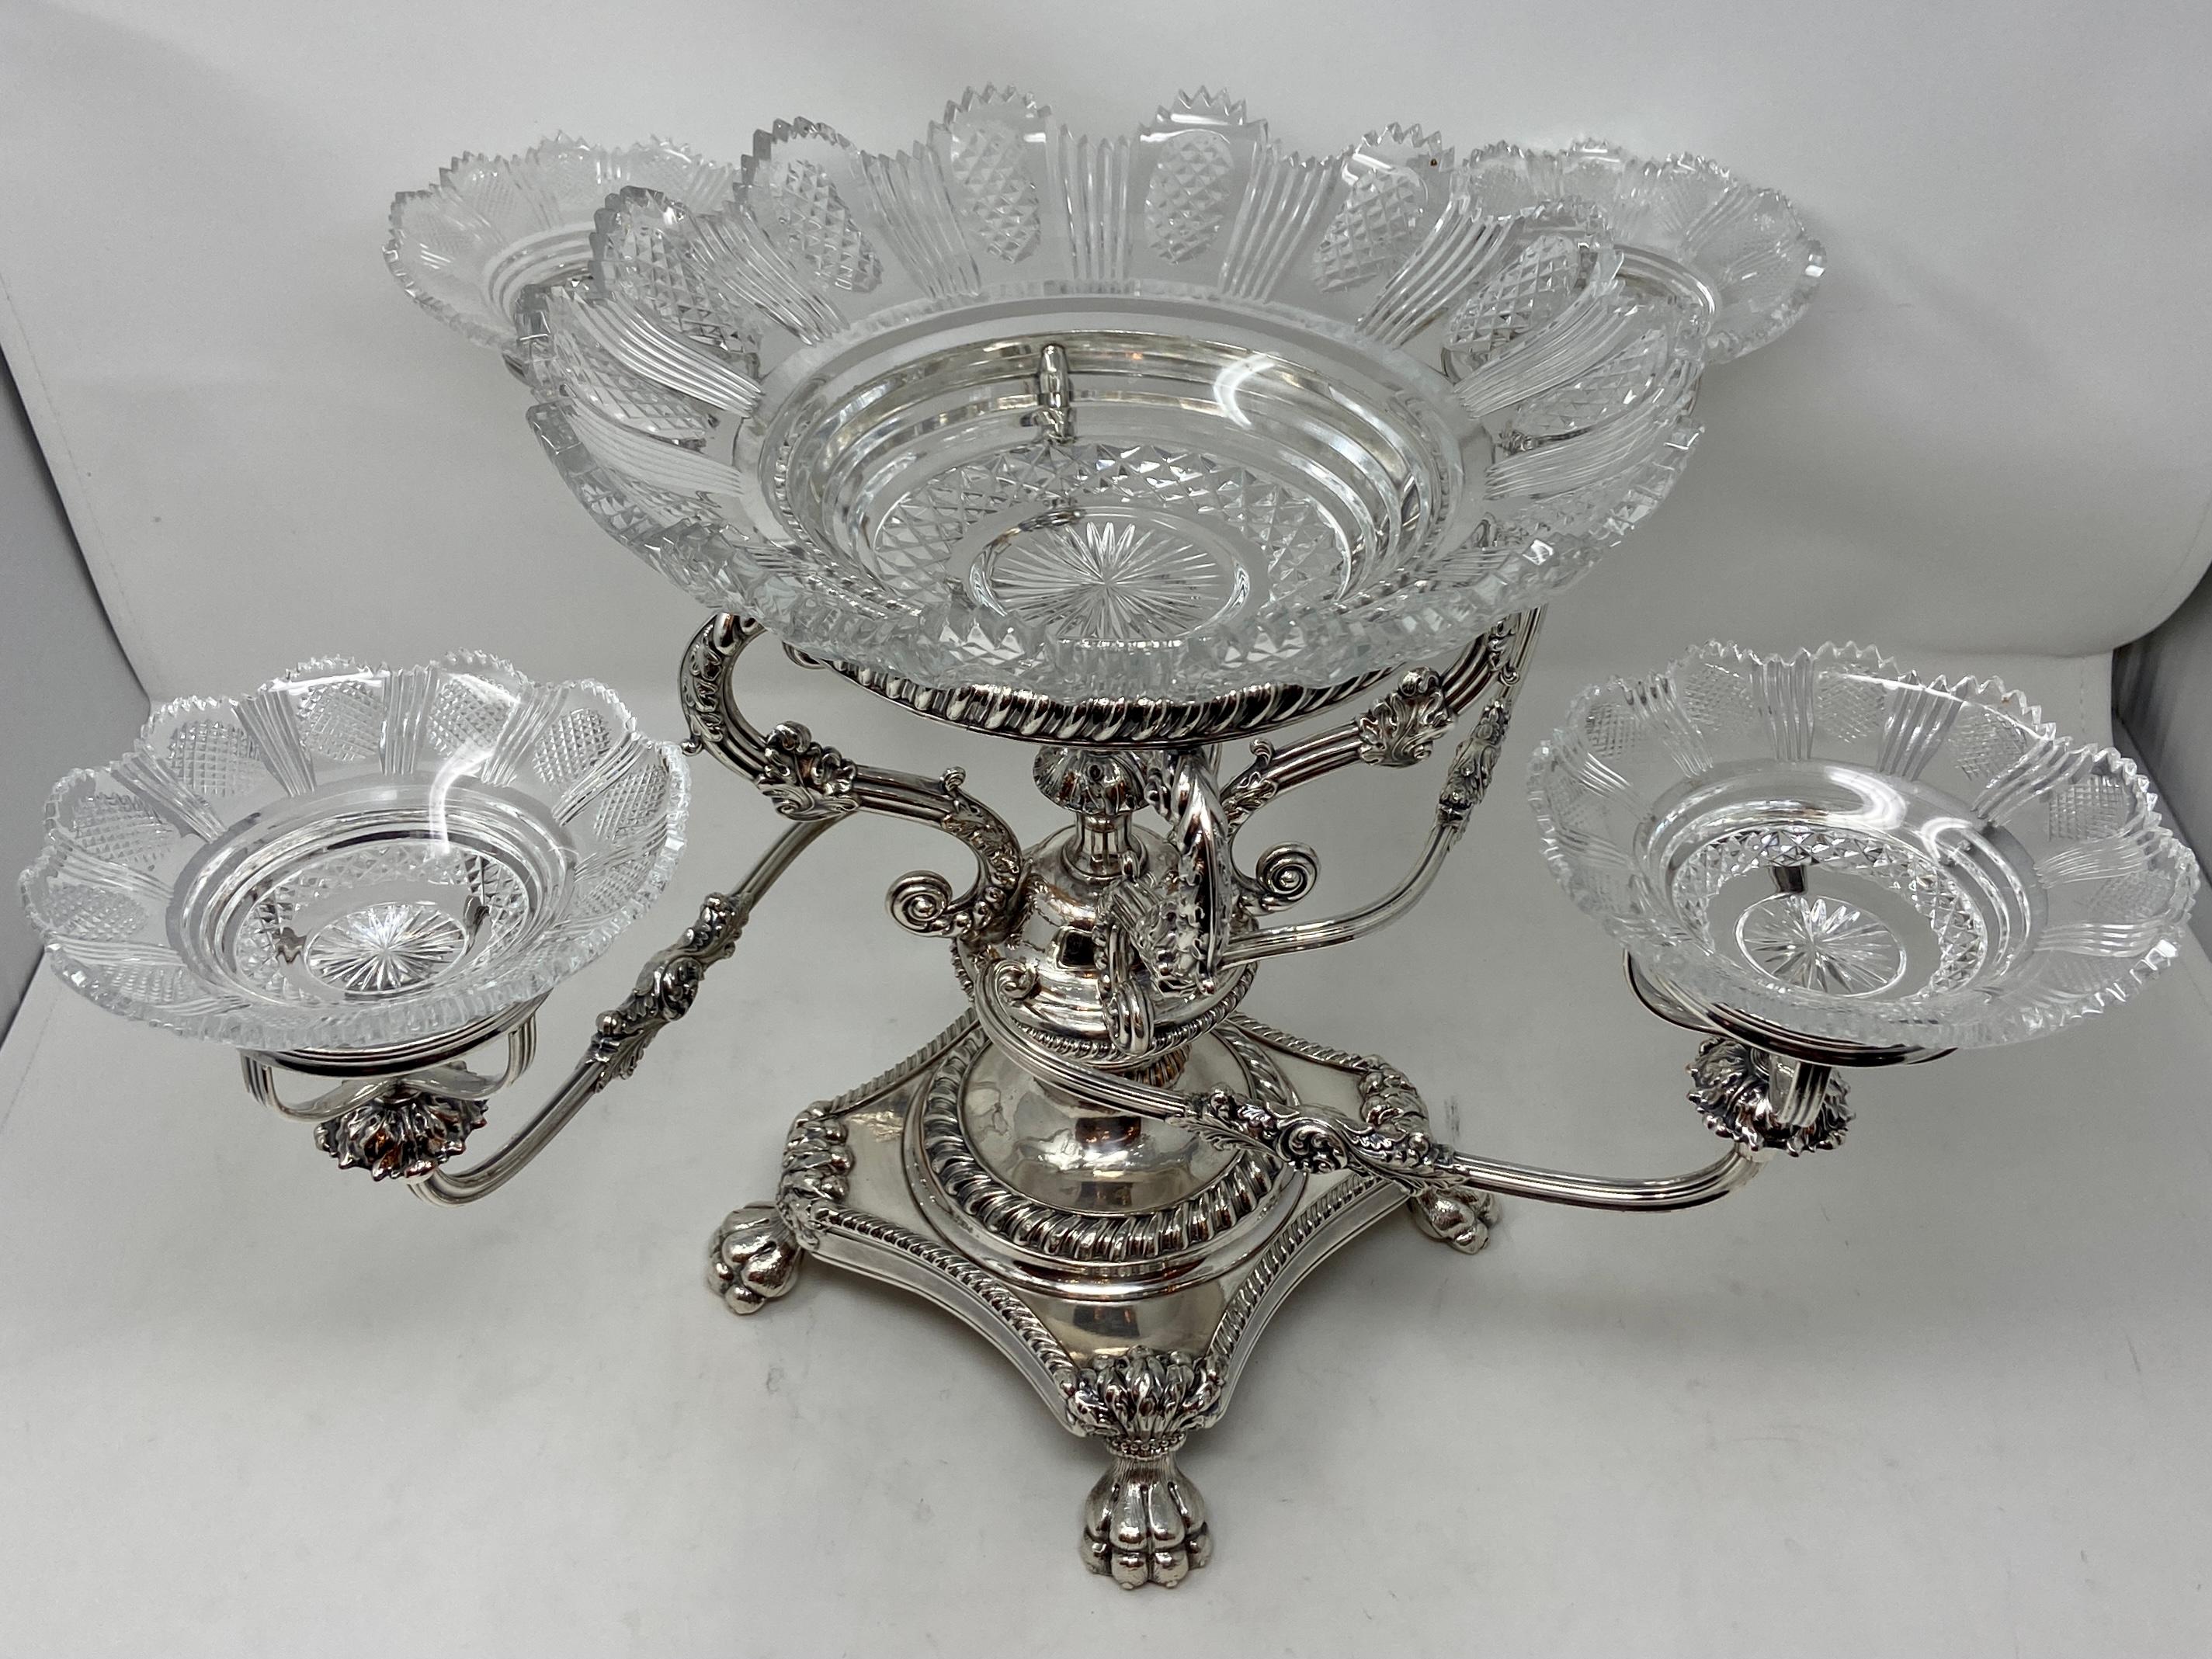 Handmade vintage English Georgian style silver-plate and cut crystal Epergne centerpiece.